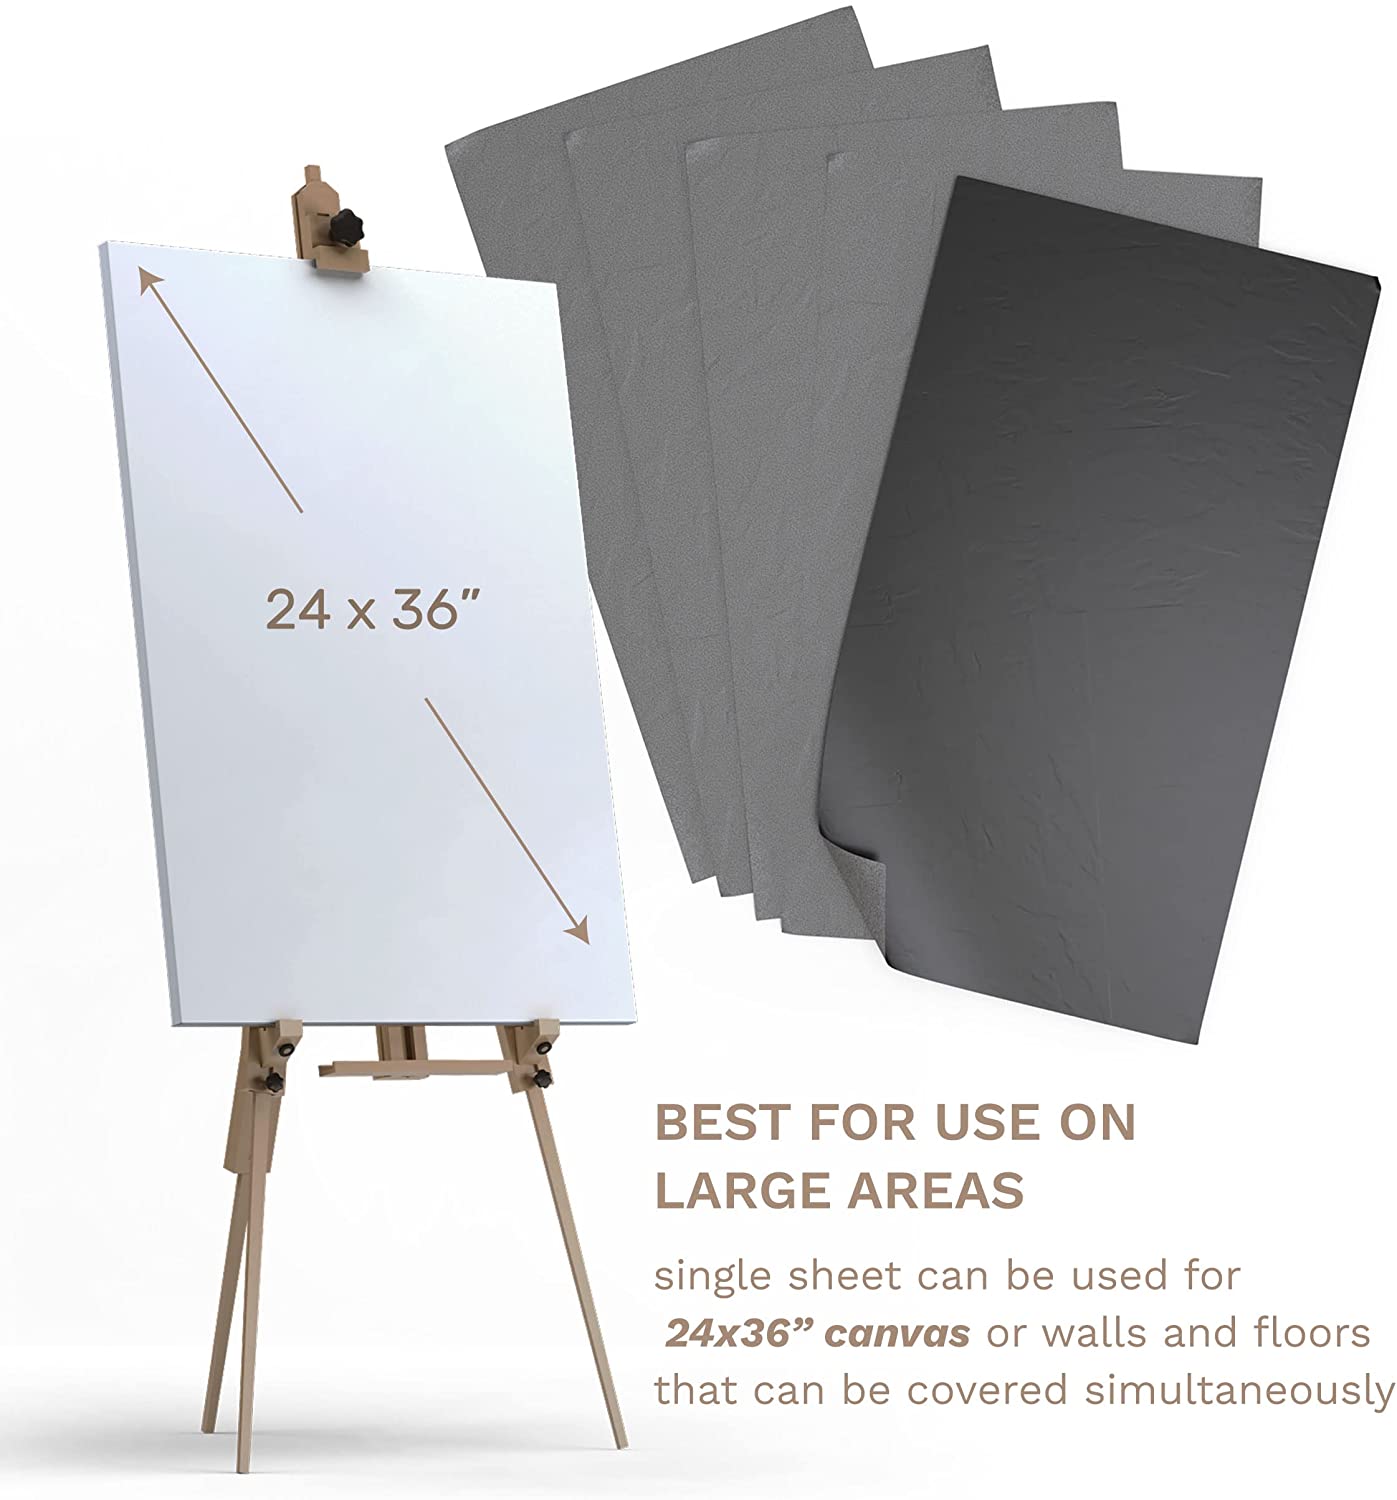 Graphite Transfer Paper, 9 x 13 - 50 Sheets - Black Waxed Paper